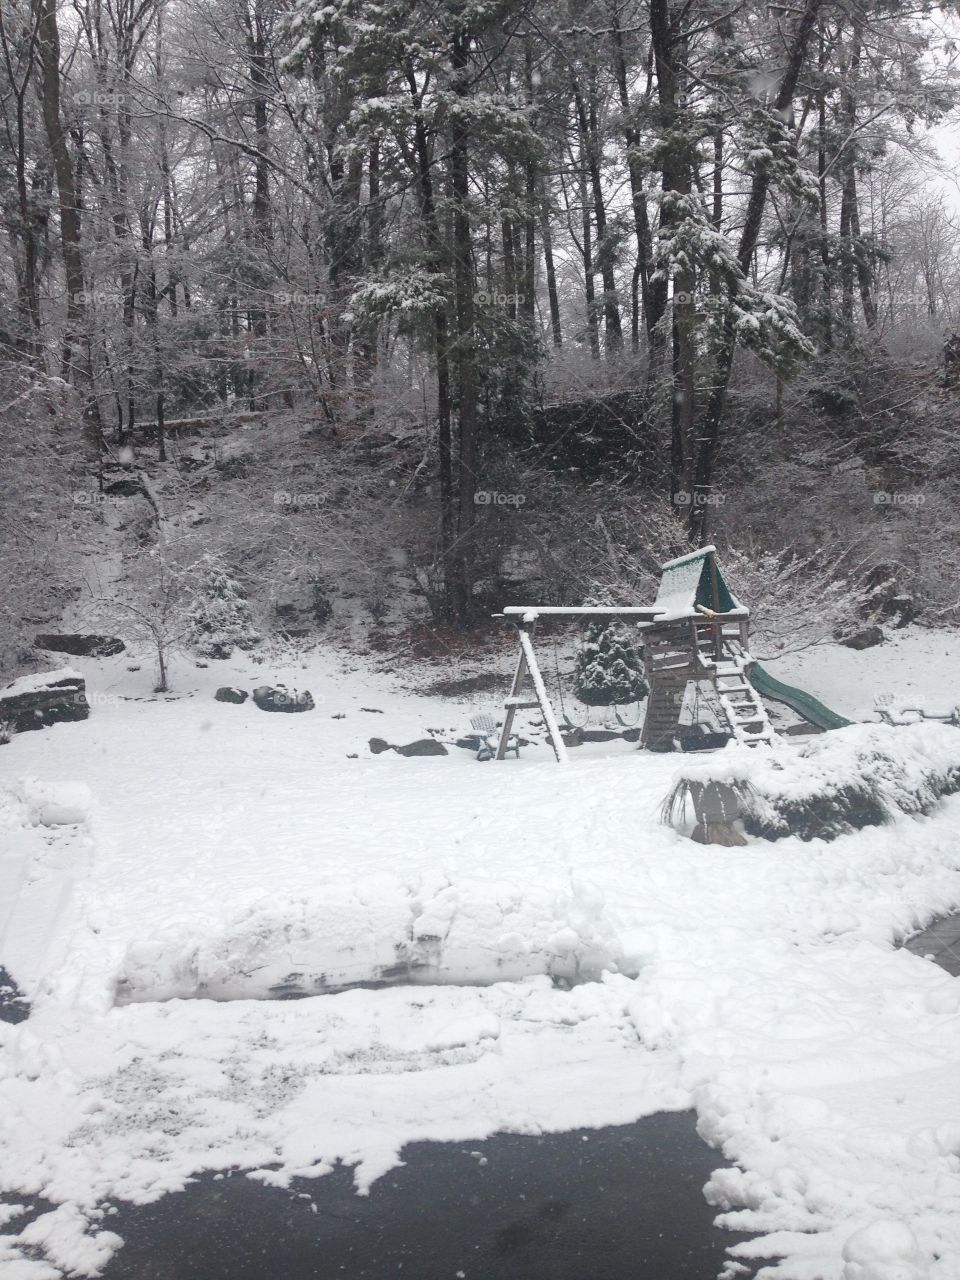 Snowy views. View from the inside in Pennsylvania 